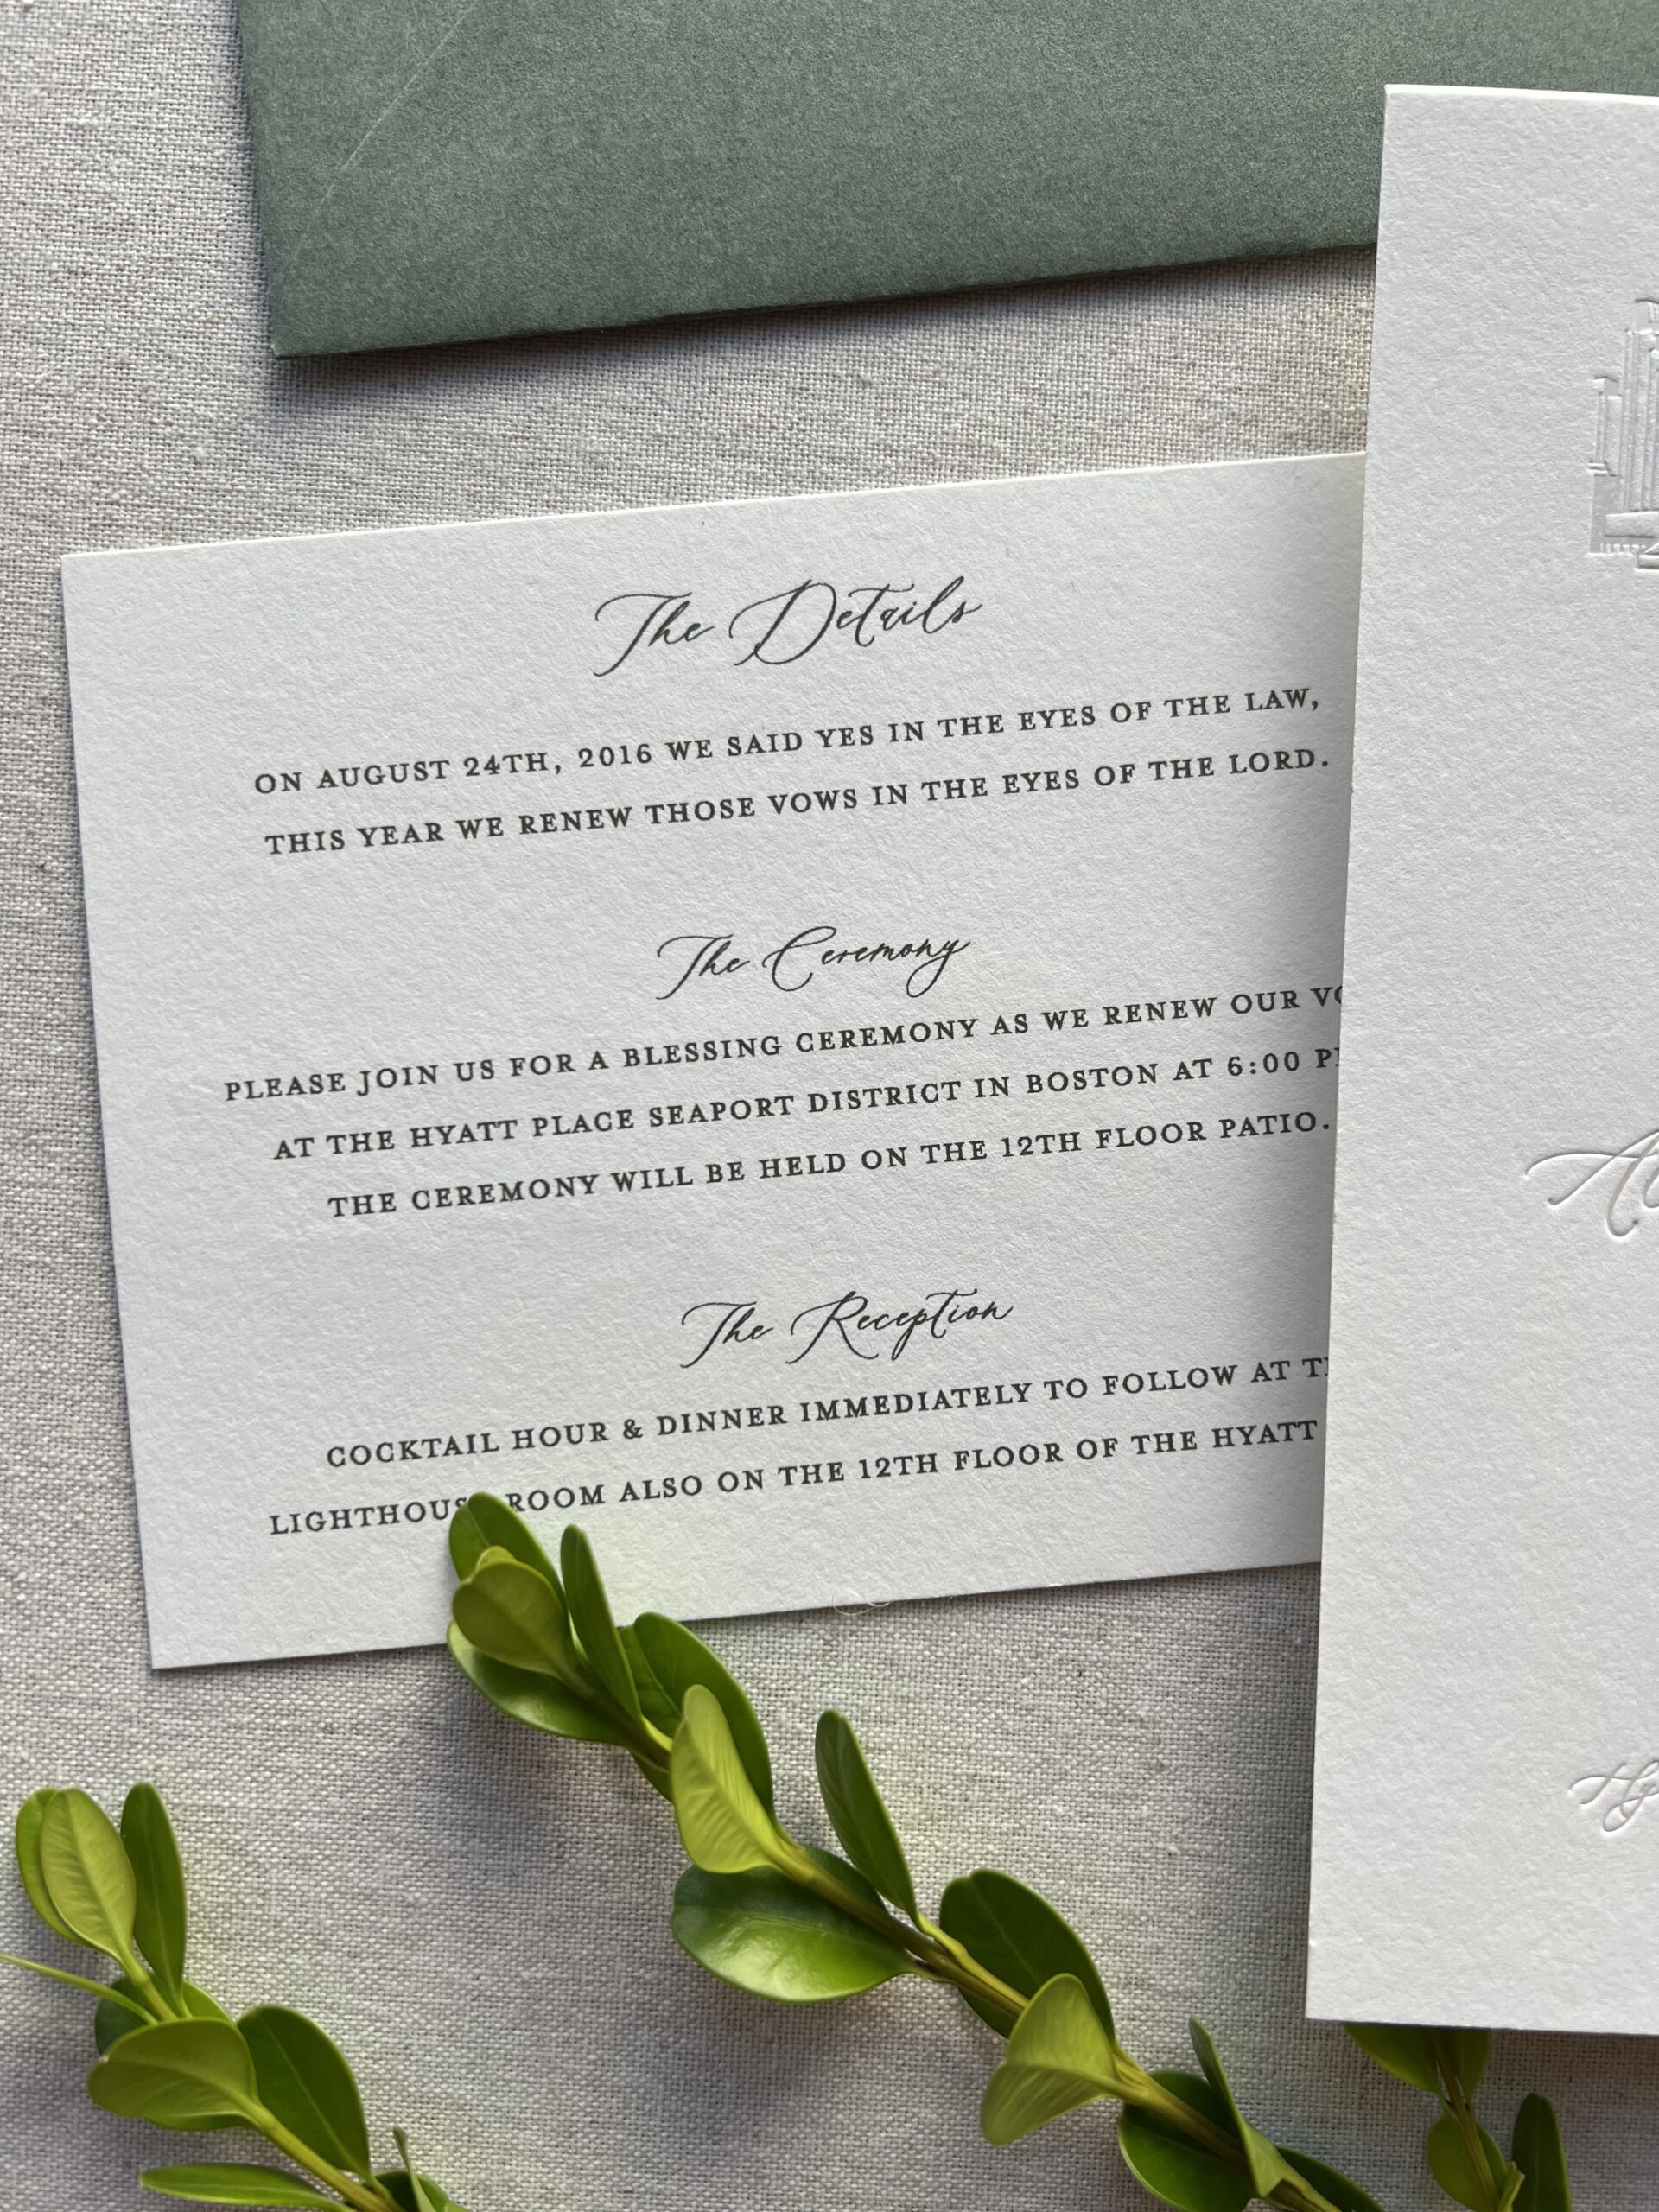 wedding invitations do's and dont's - have a details card instead of overcrowding the card